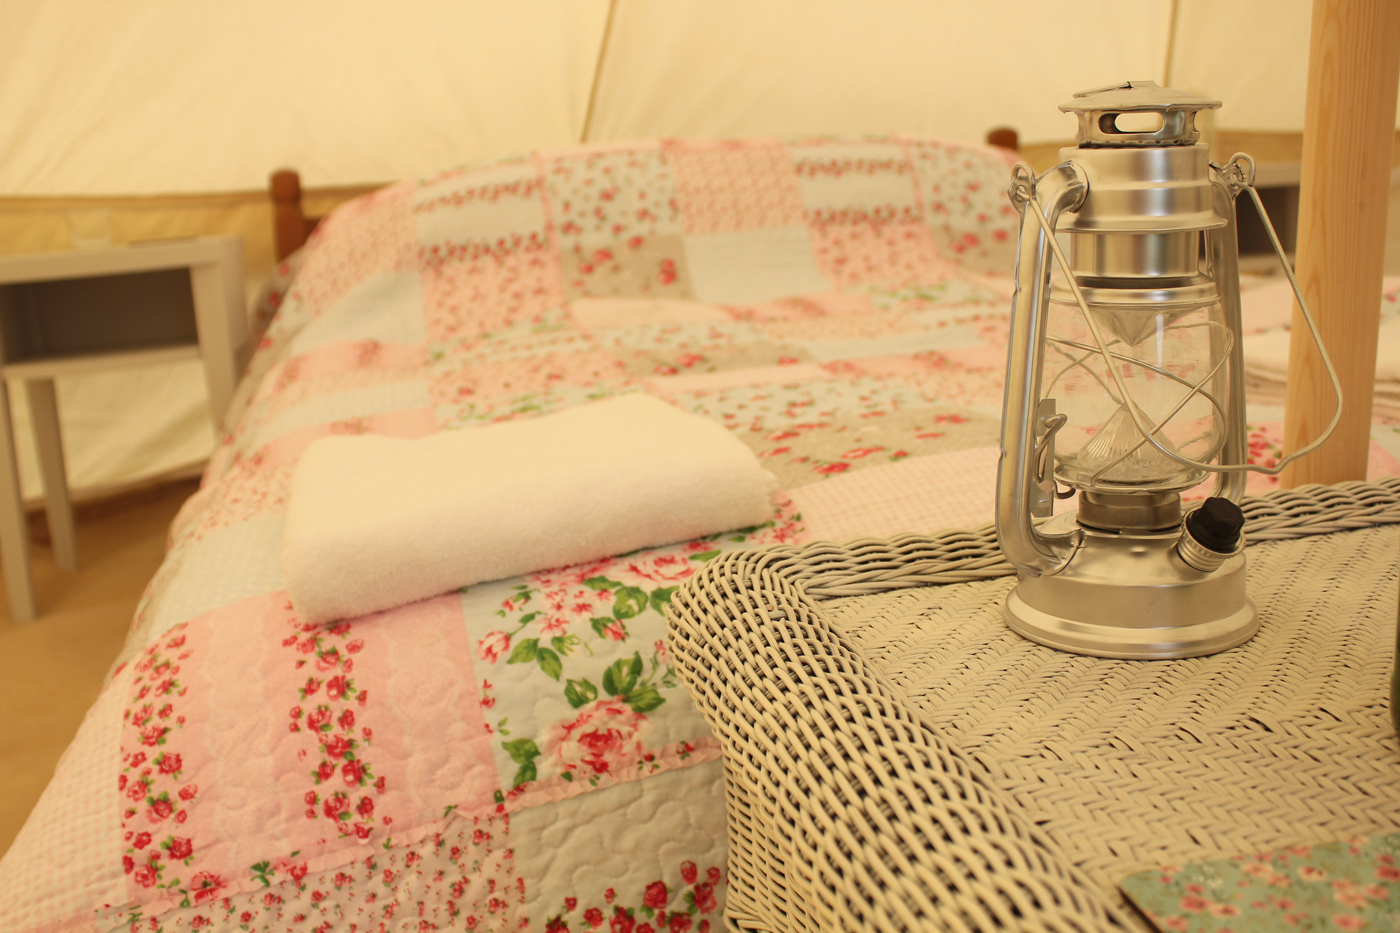 Inside our Canvas and Clover Bell Tent